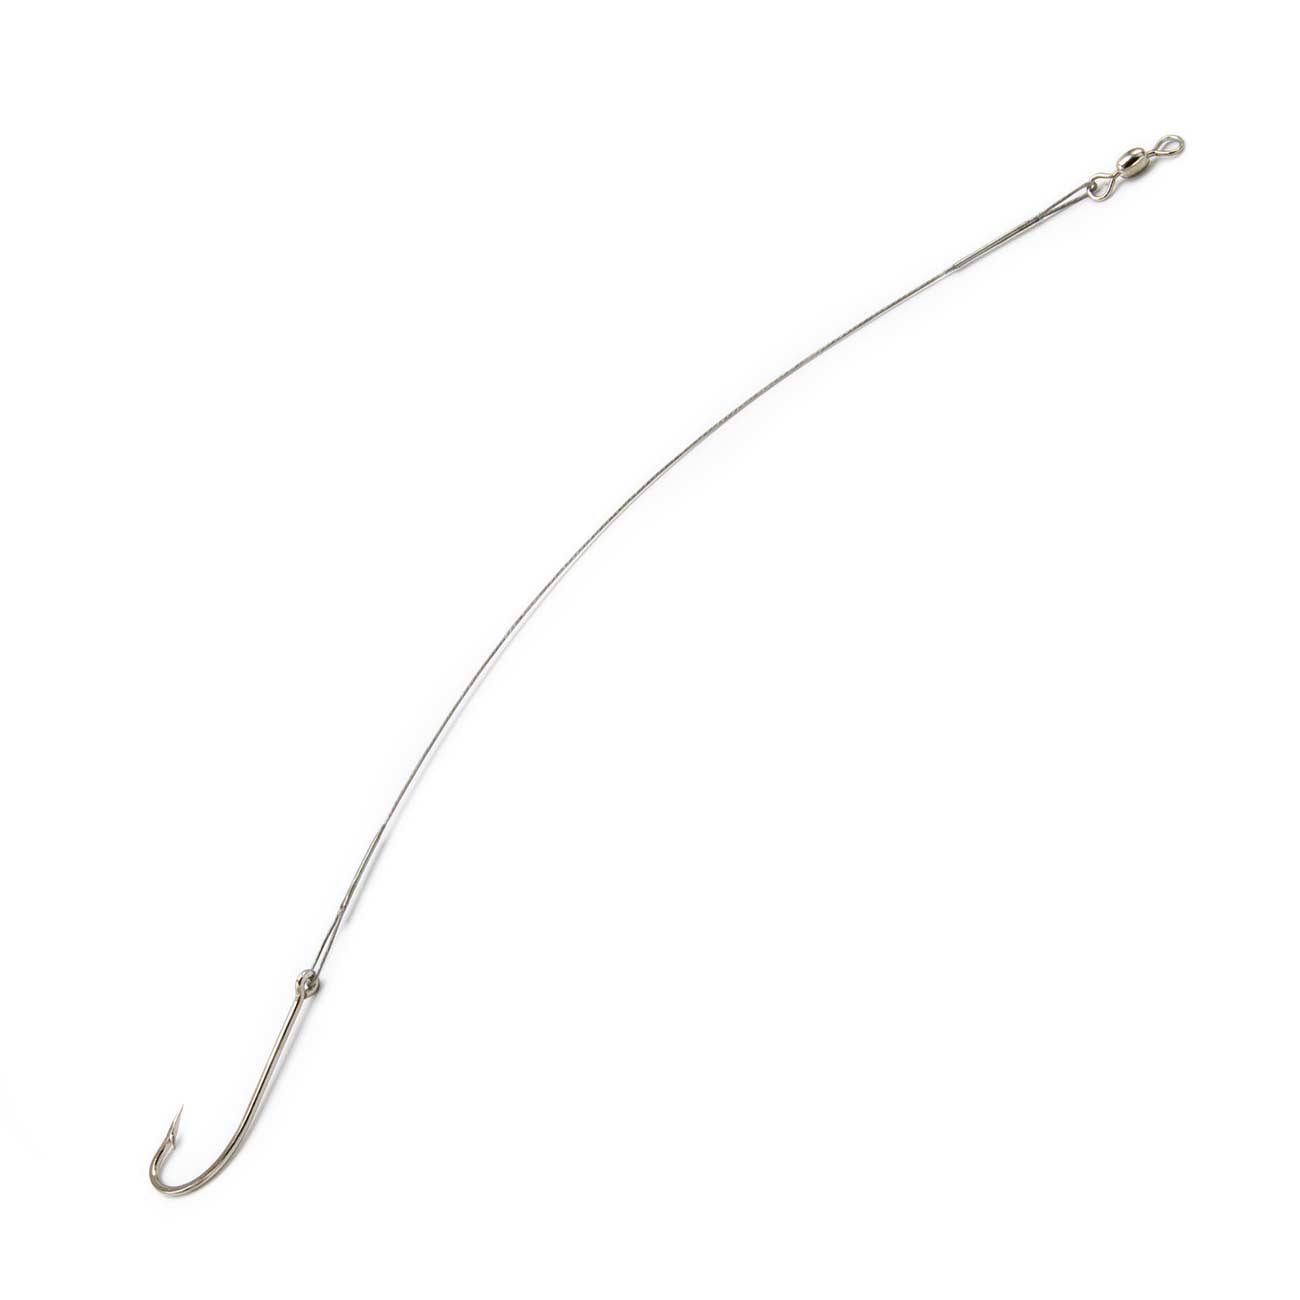 Coated Wire Leader Hook Rig – Rite Angler